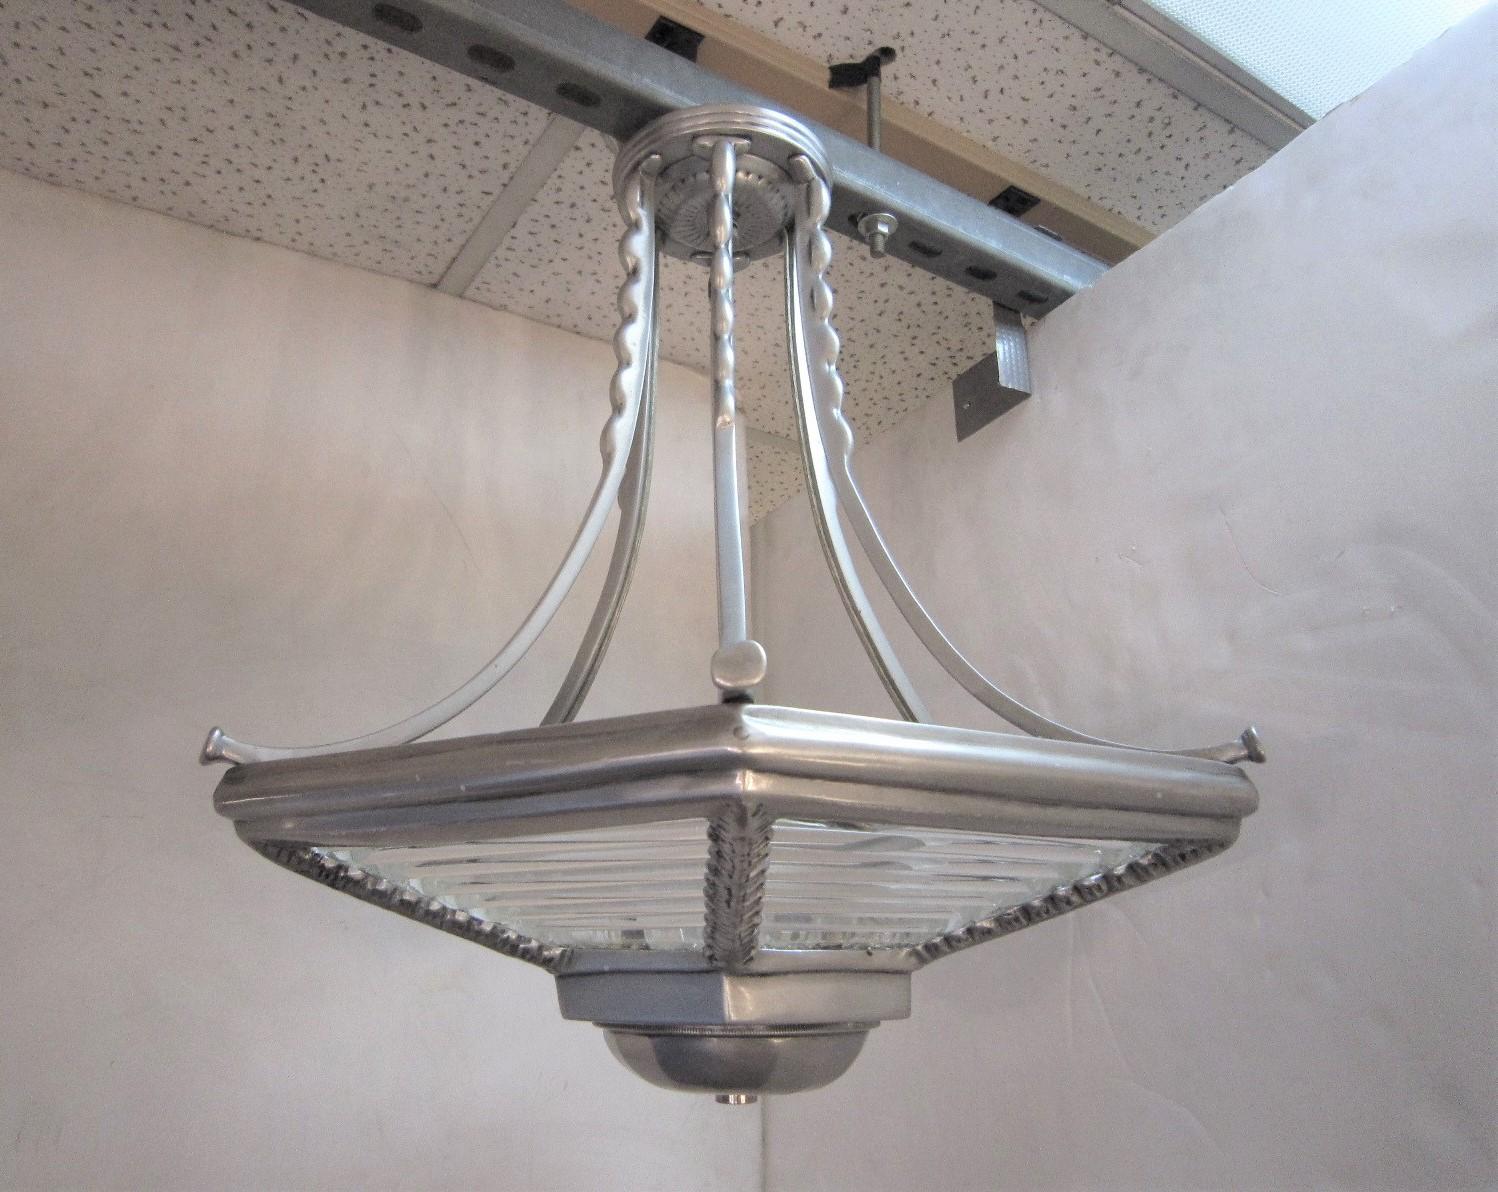 An Industrial six sided, hexagonally shaped pendant light with glass rod insets and suspended by six splay arms decorated with a lovely scalloped detail. The frame is in its natural aluminum finish
The glass may appear distorted in a few of the